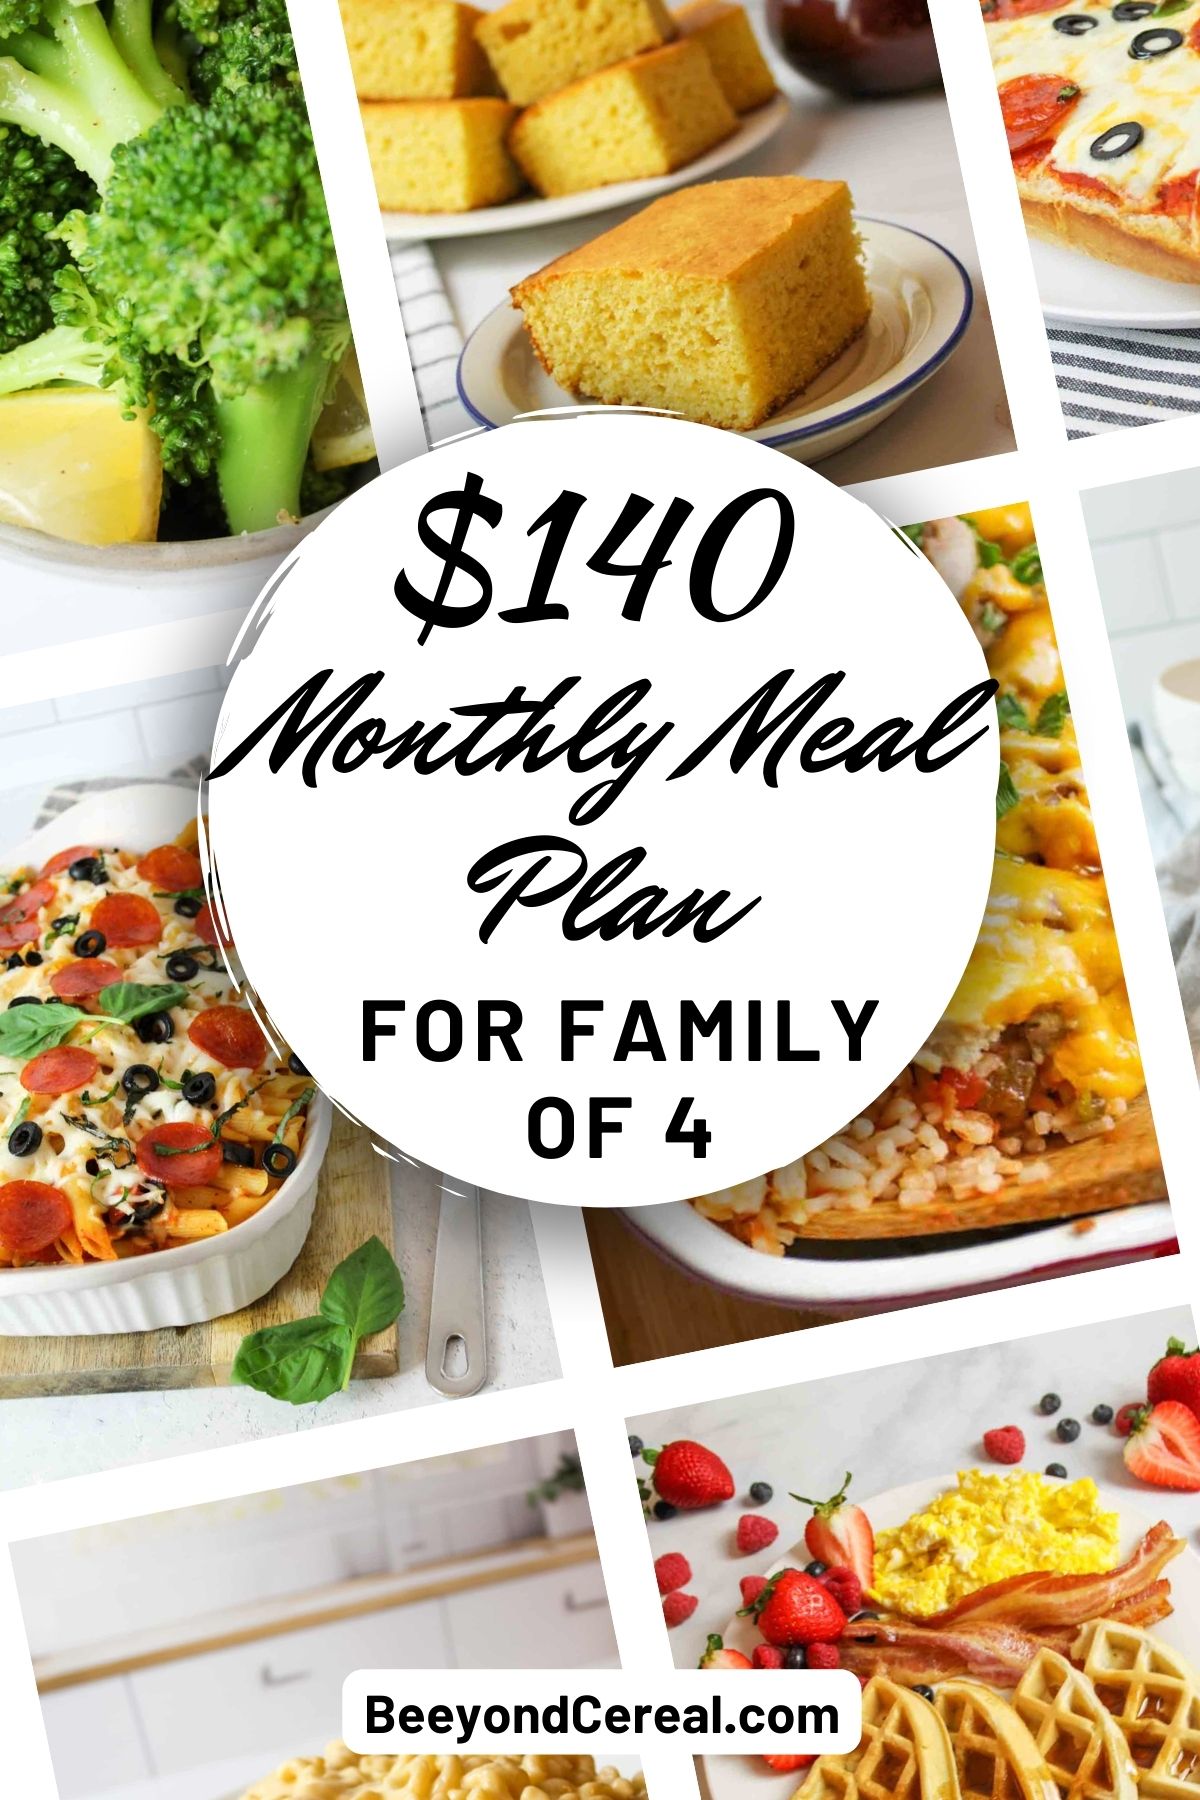 $140 monthly meal plan for a family of 4.